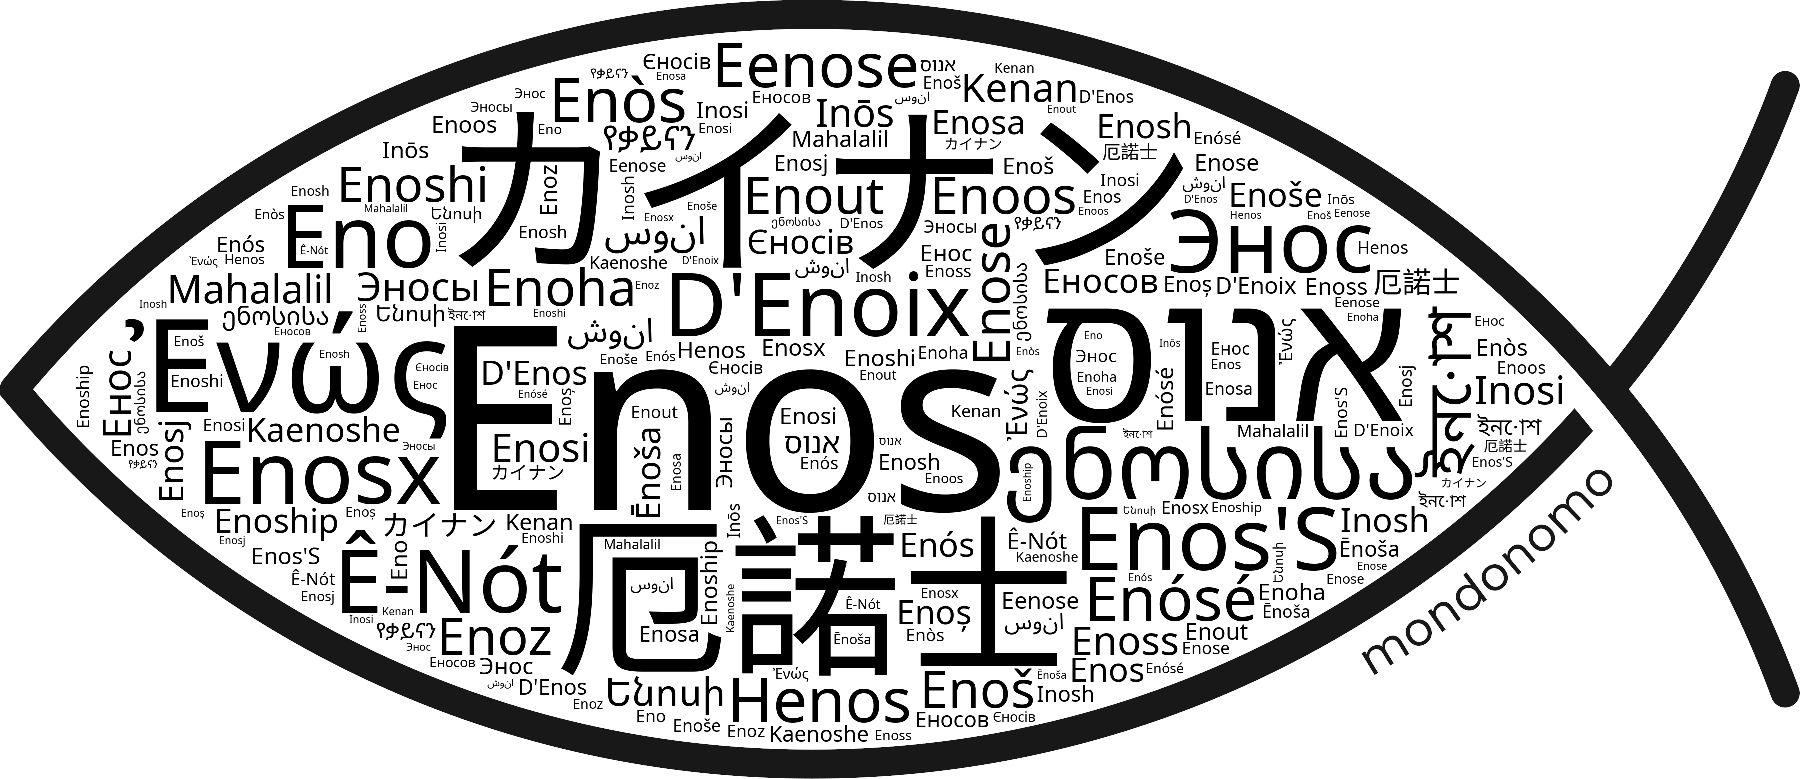 Name Enos in the world's Bibles